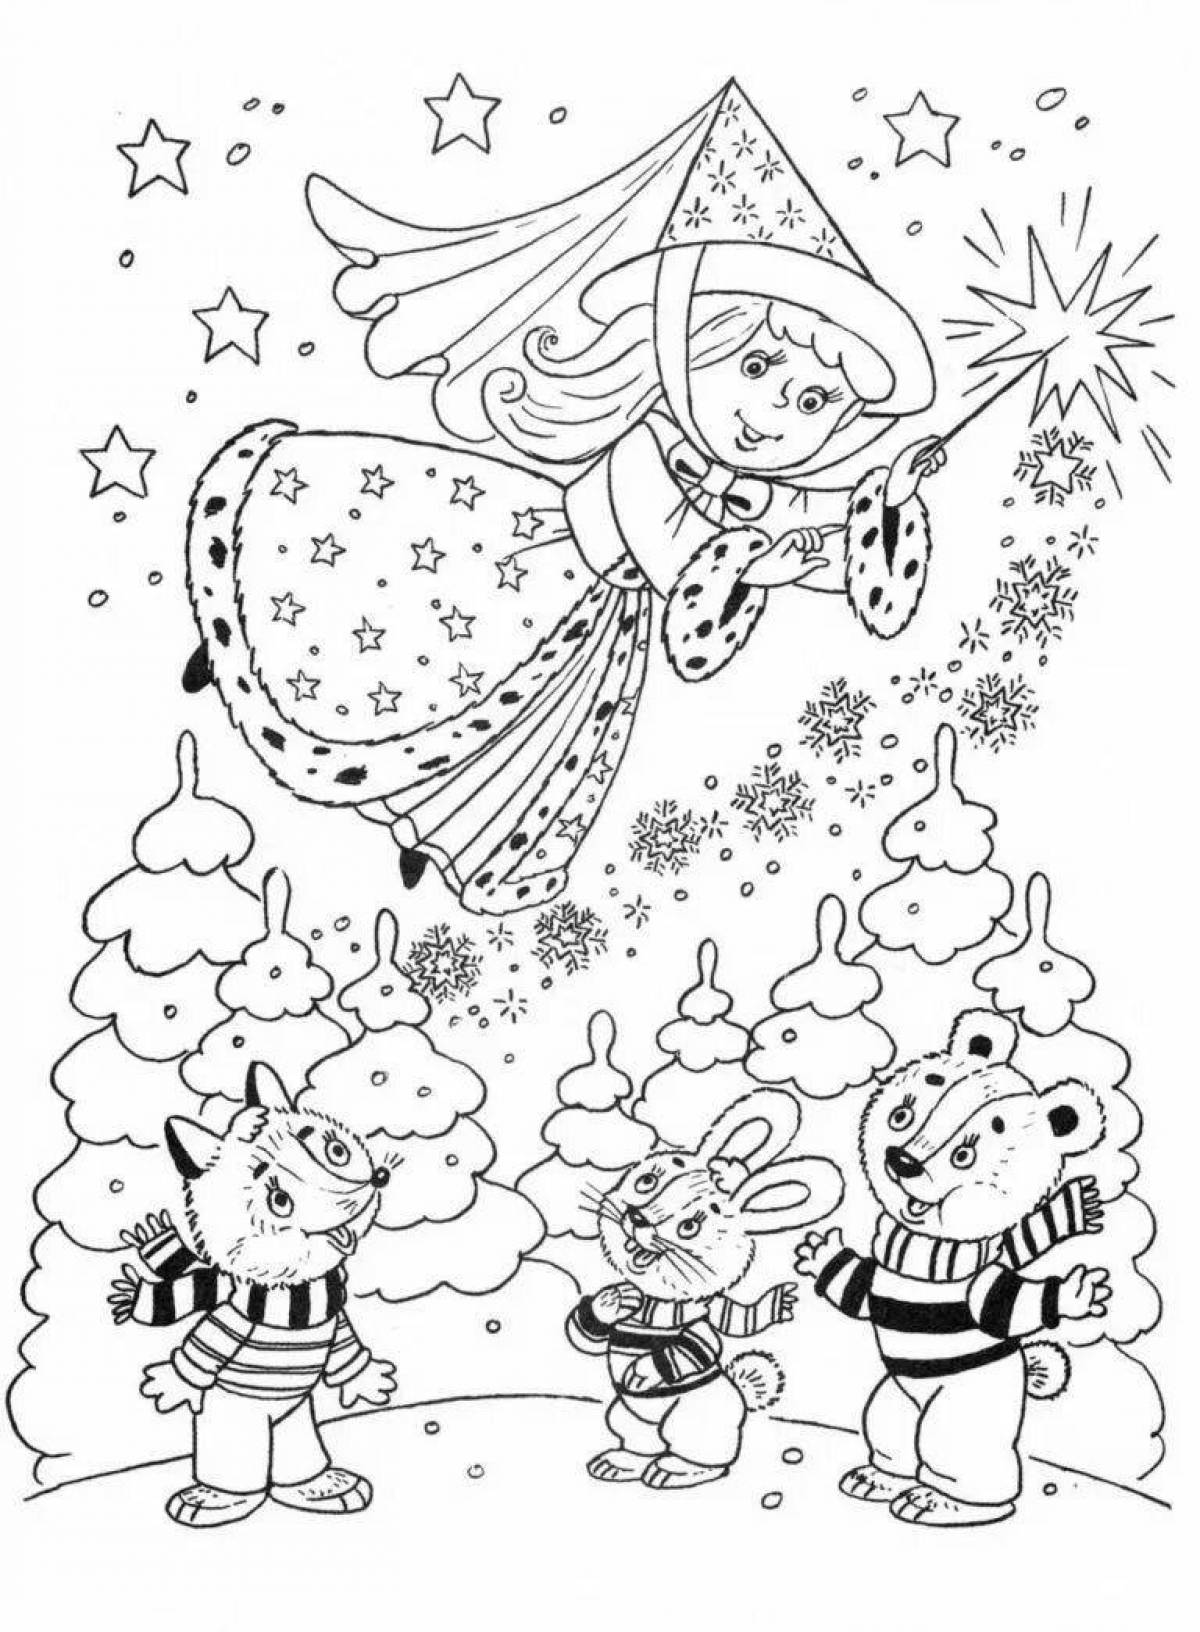 Awesome winter fantasy coloring book